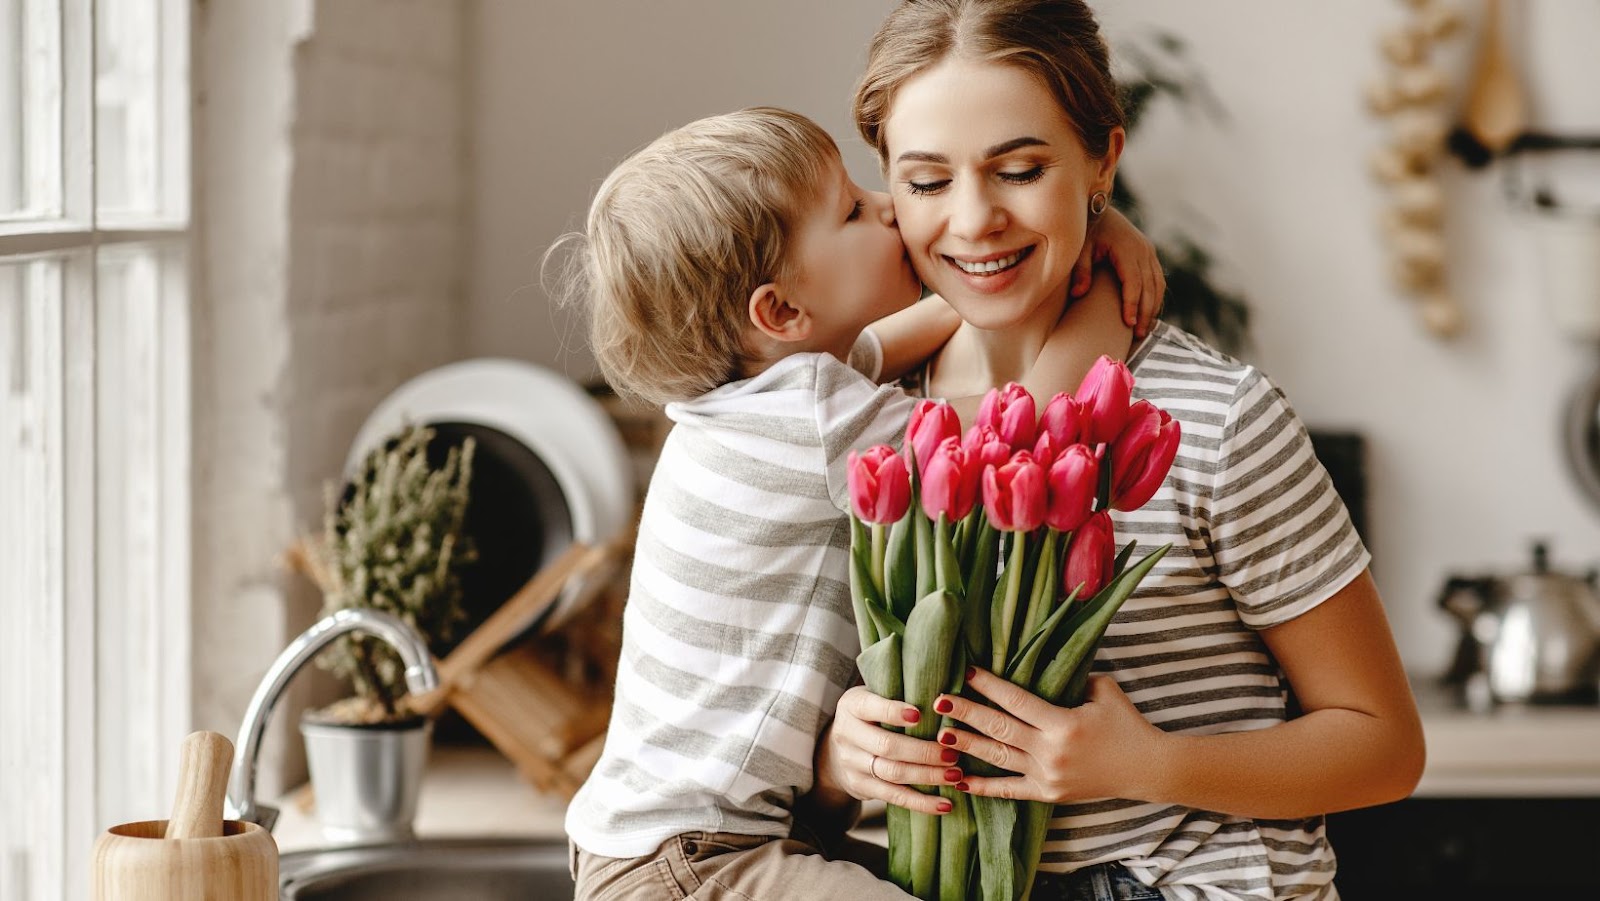 Is it a Good Idea to Give Your Wife Tulips For Mother’s Day?